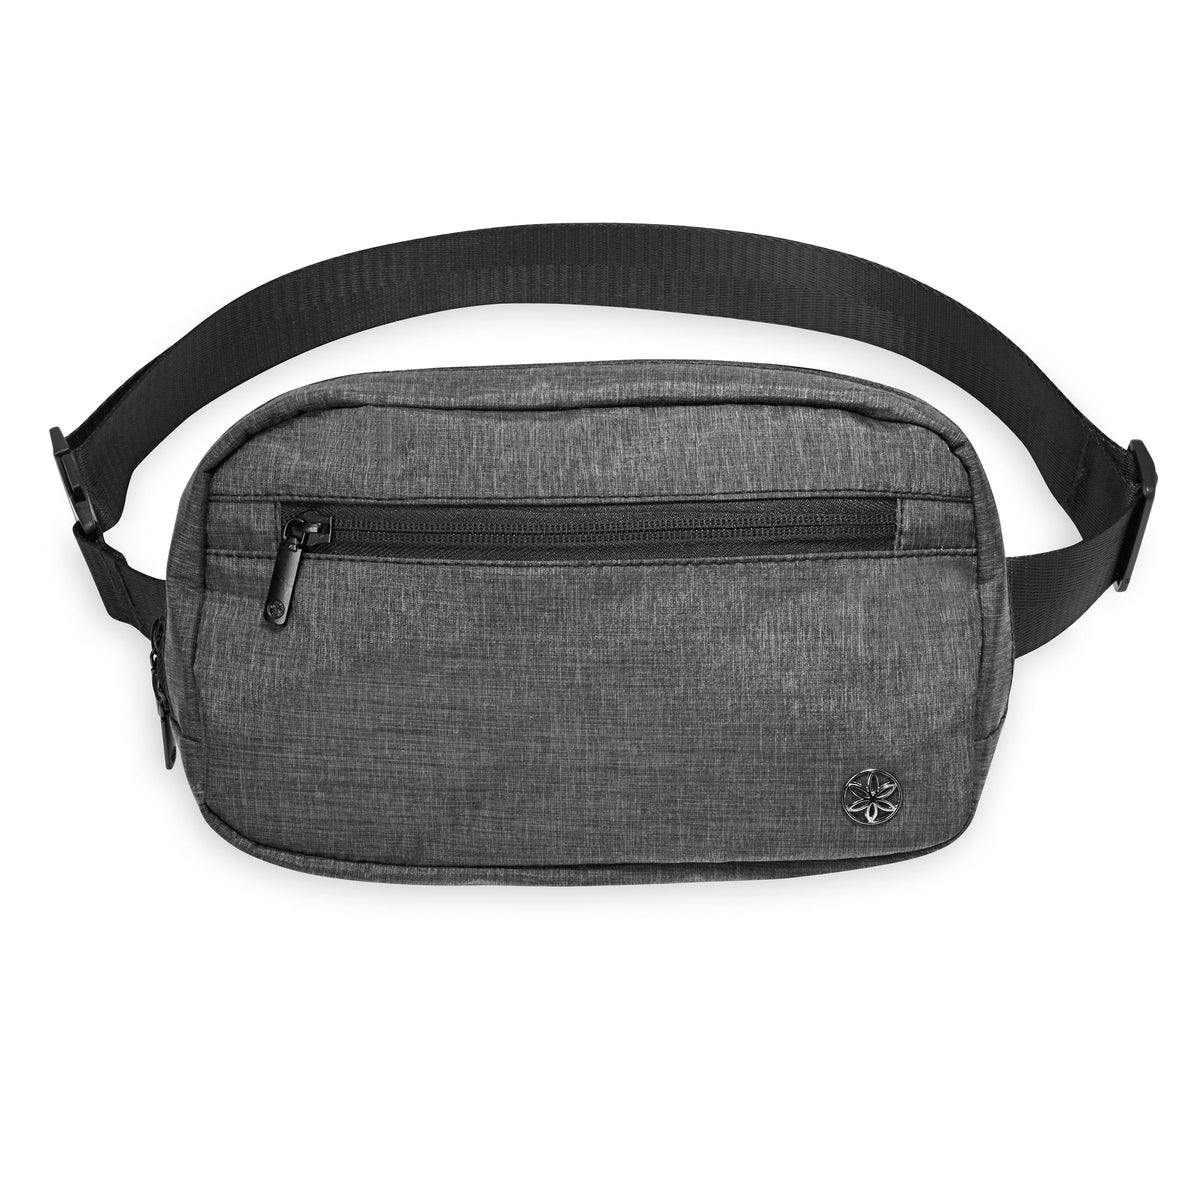 Get Moving Waist Pack front